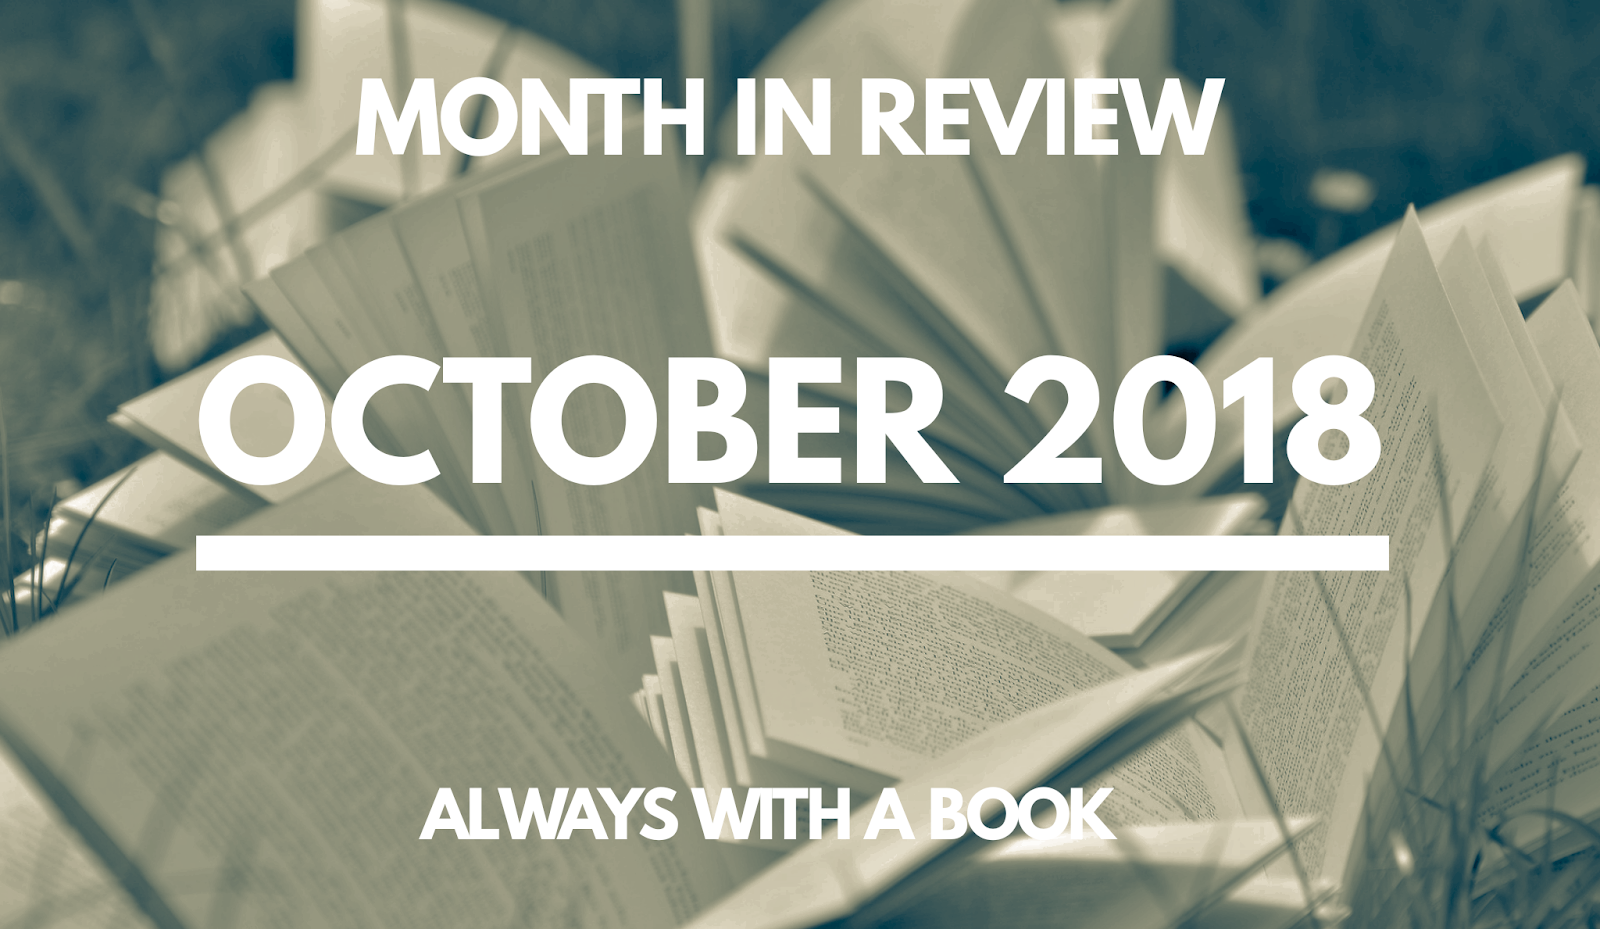 Month in Review: October 2018